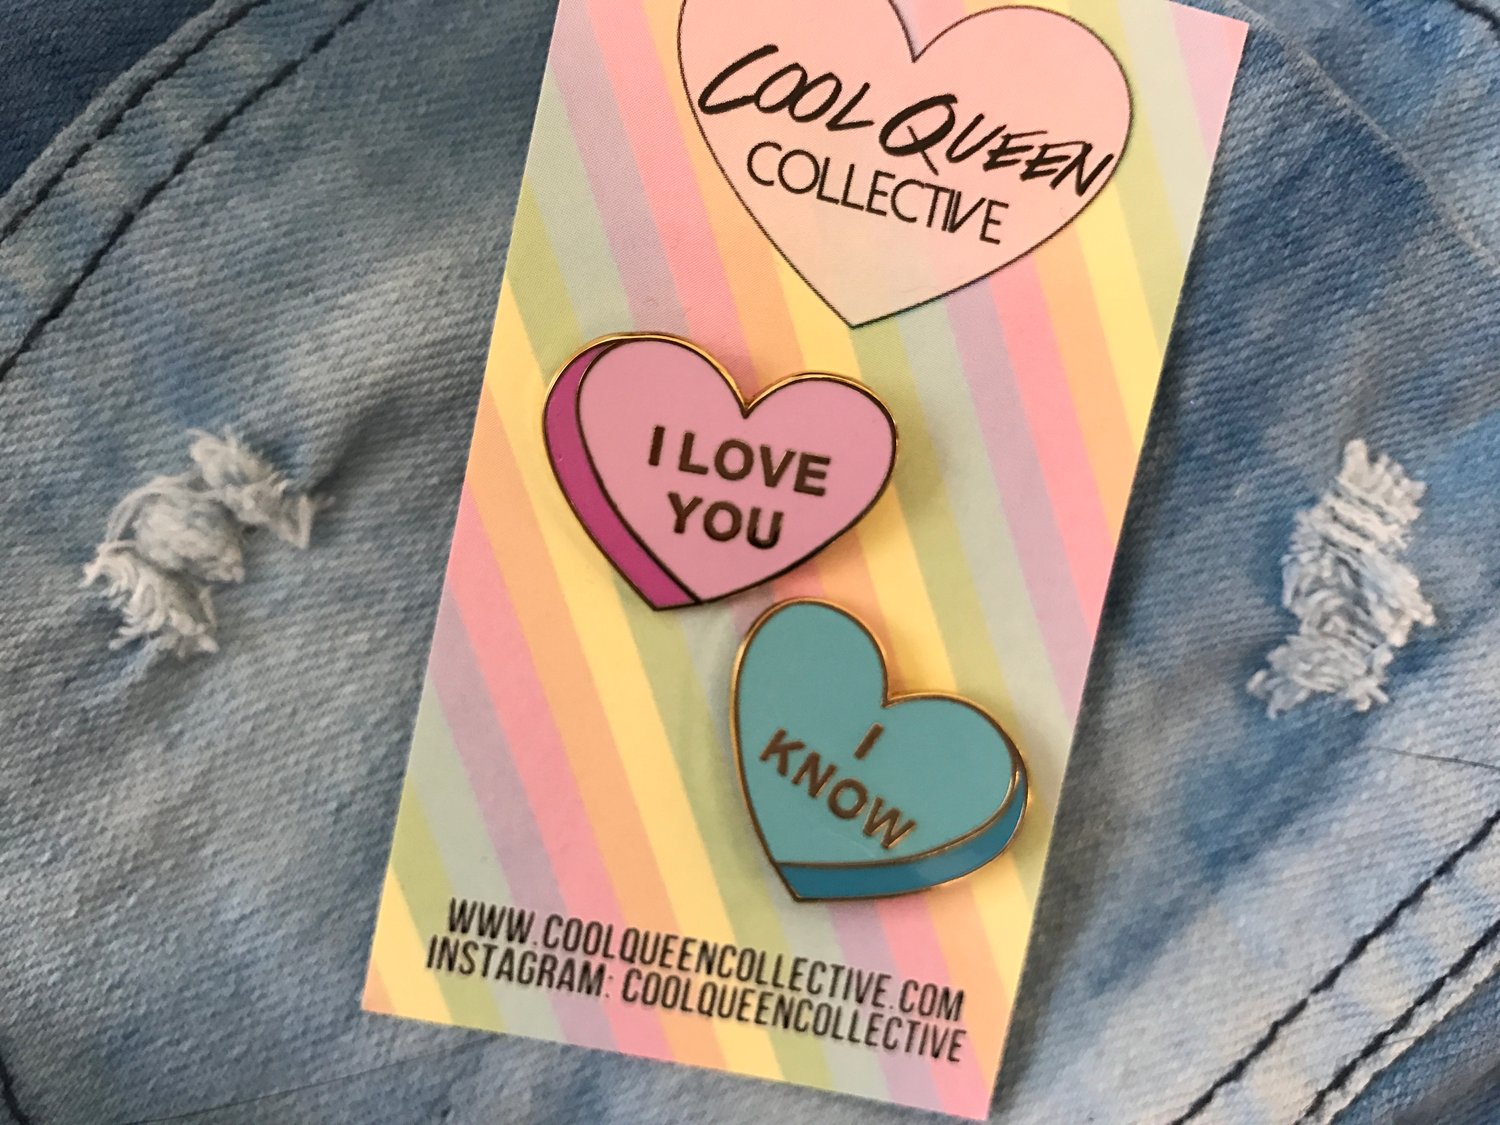 Image of "I Love You", "I Know" Conversation Heart Pair Enamel Pin Set